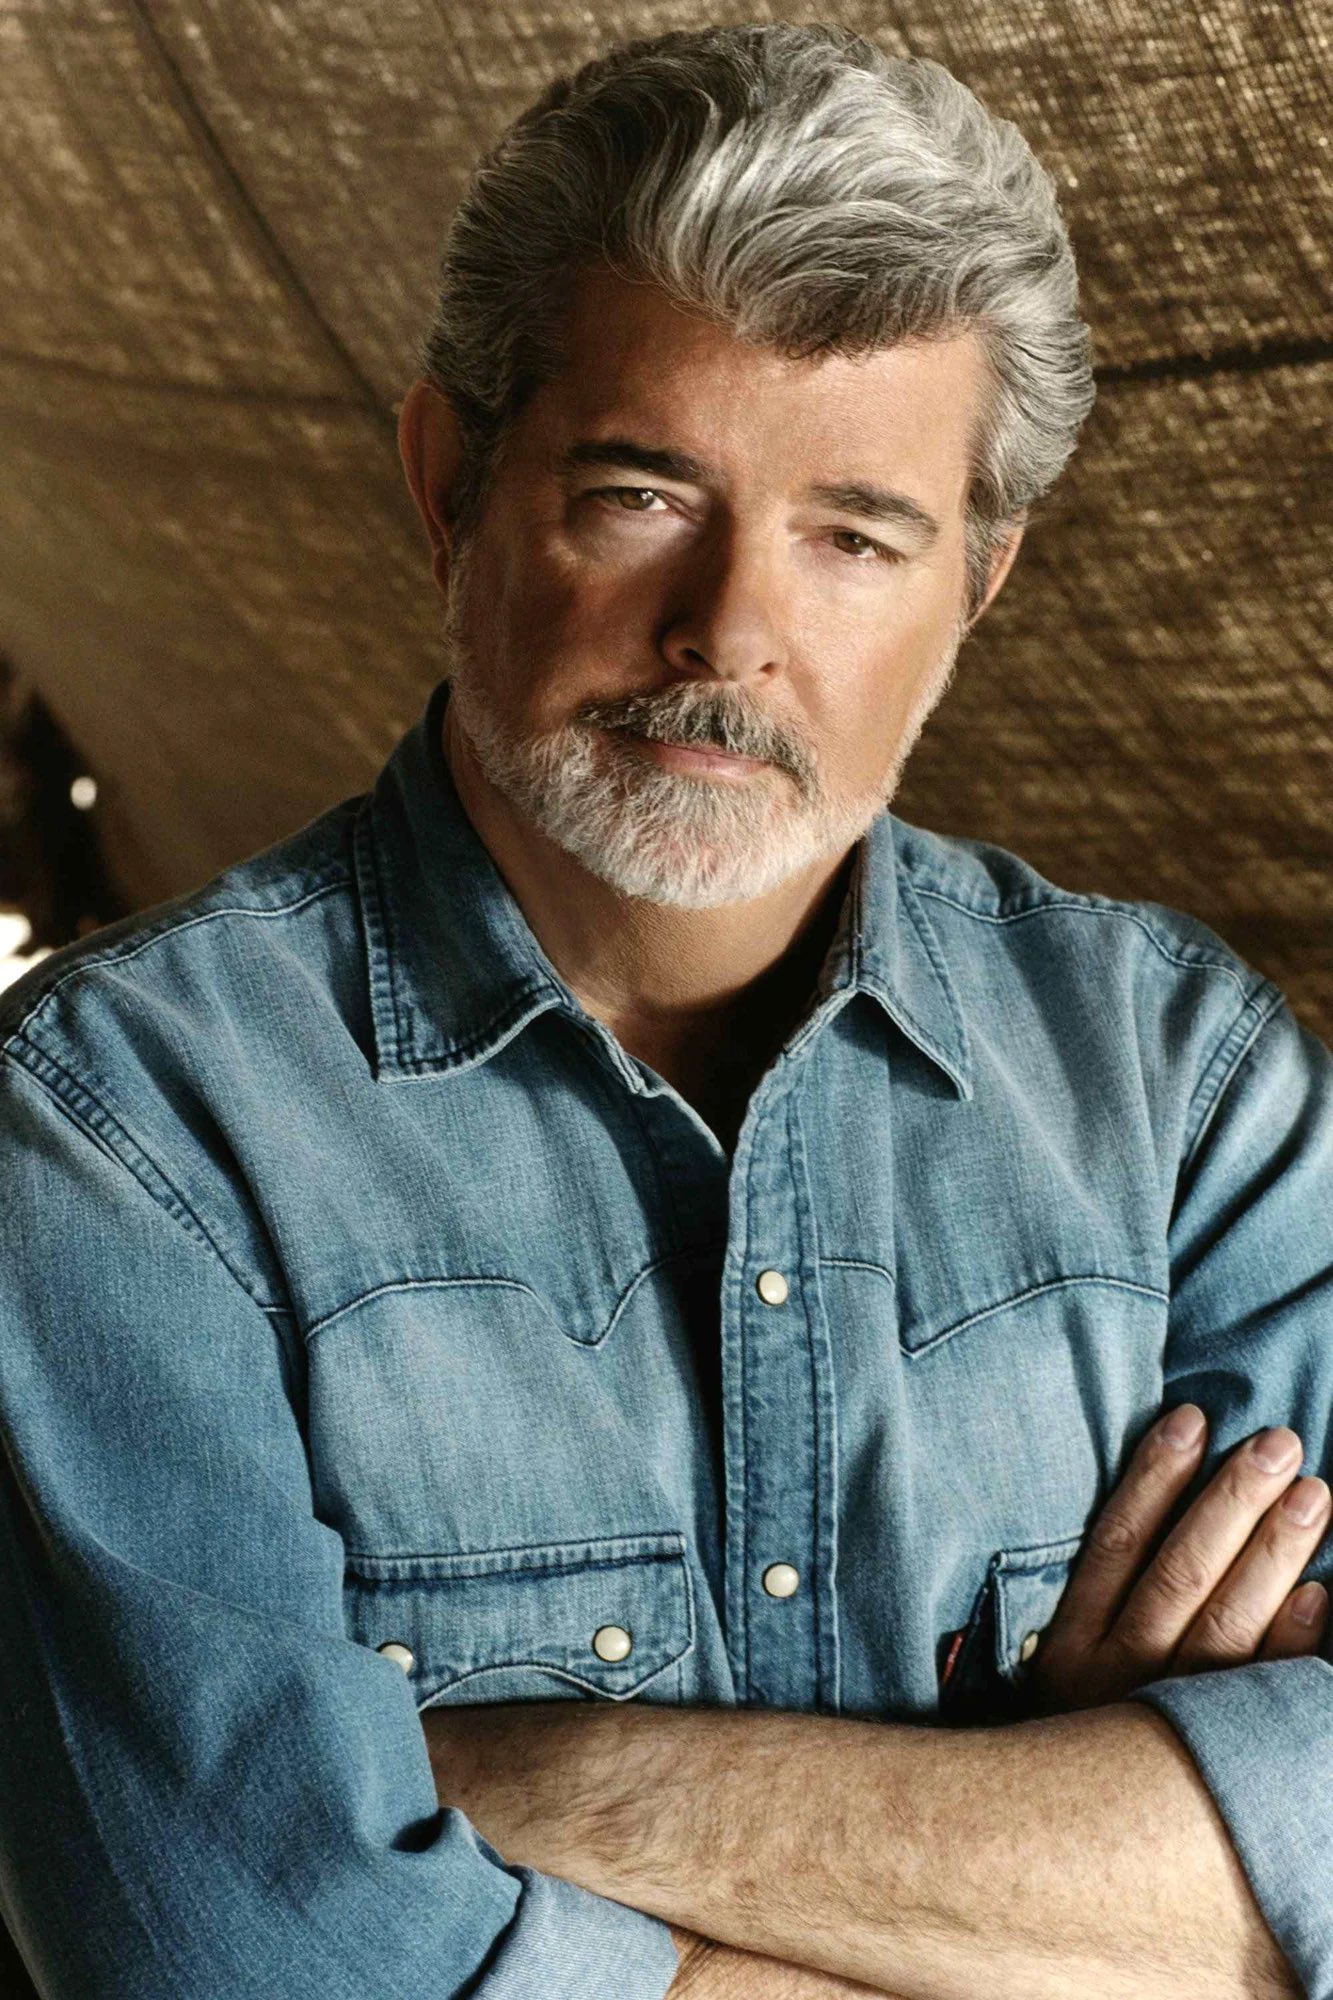 Thank the Maker!

Happy Birthday to The Man, The Myth, The Legend, The Maker George Lucas!  